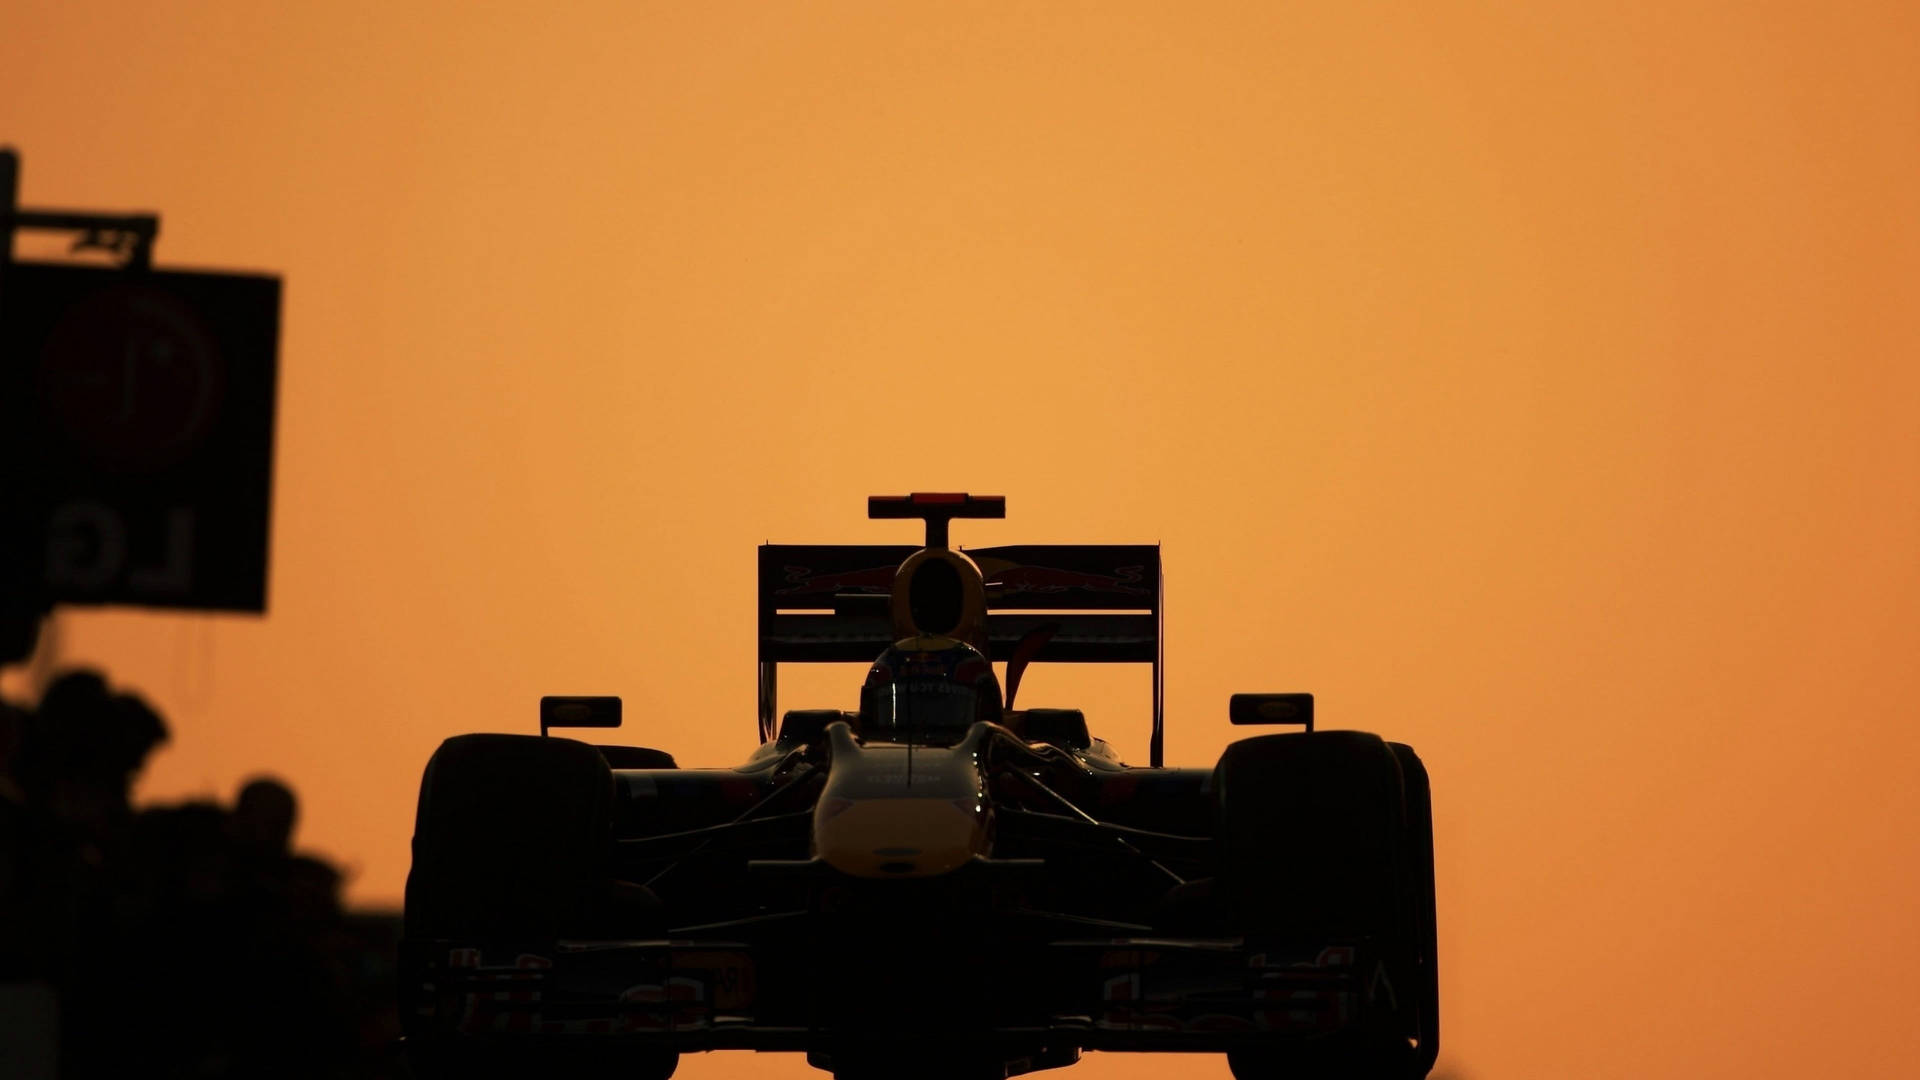 Exciting Action Of F1 Racing Car In Silhouette